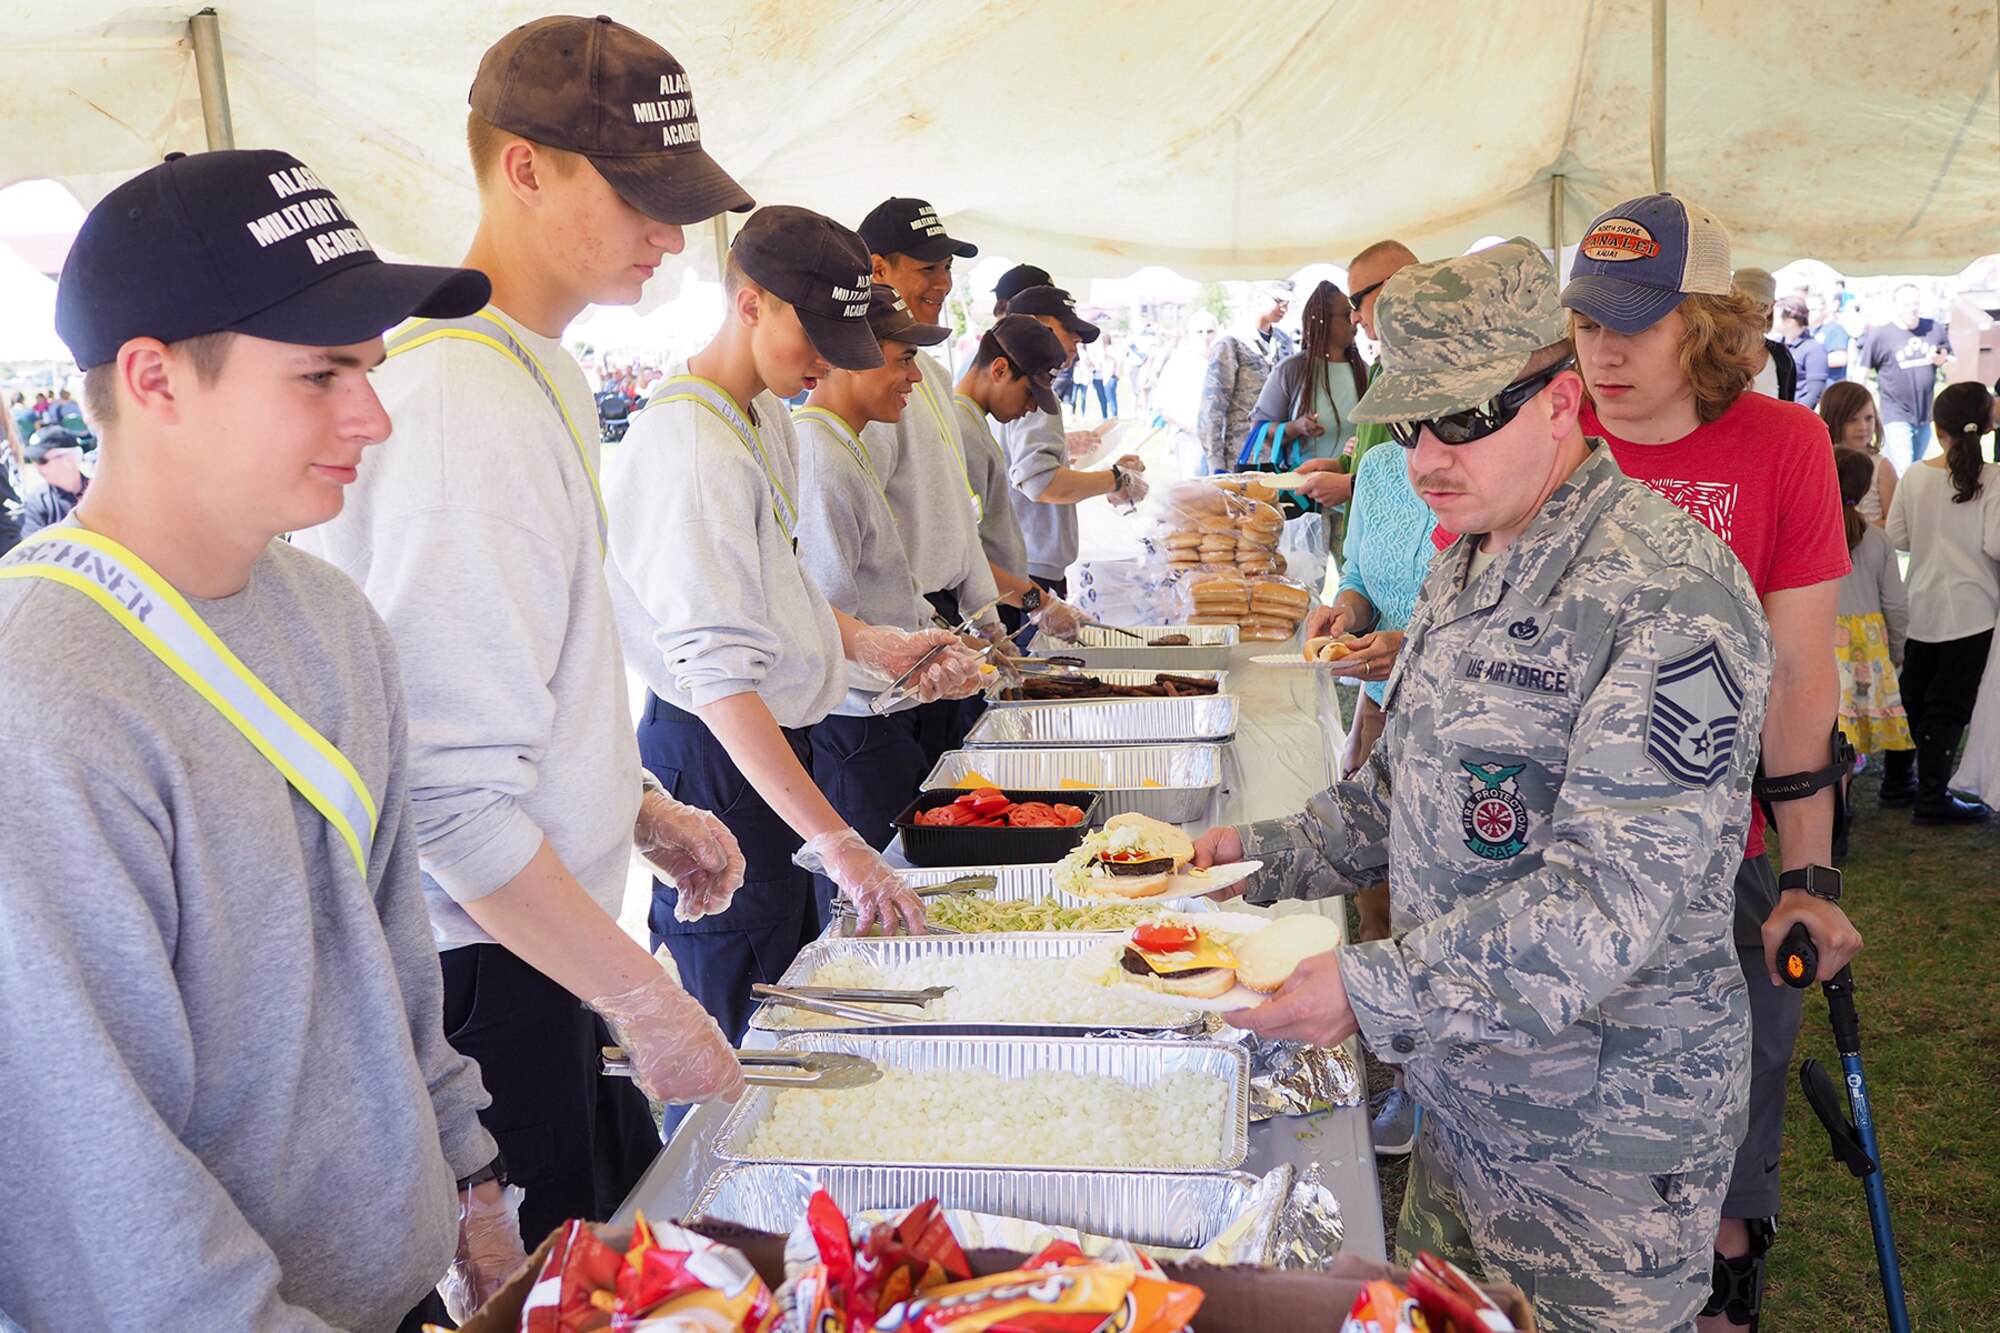 Air Force Senior Master Sgt. John Smith, a 176th Civil Engineer Squadron firefighter, walks through a food line at the Military Appreciation Week picnic at the Joint Base Elmendorf-Richardson, Alaska, Buckner Fitness Center fields June 16, 2017. Several organizations came together to provide a variety of family-fun activities such as competitive sporting events for the adults, face painting and bouncy houses for the children in addition to the Anchorage Chamber of Commerce-provided food and music during the annual event.